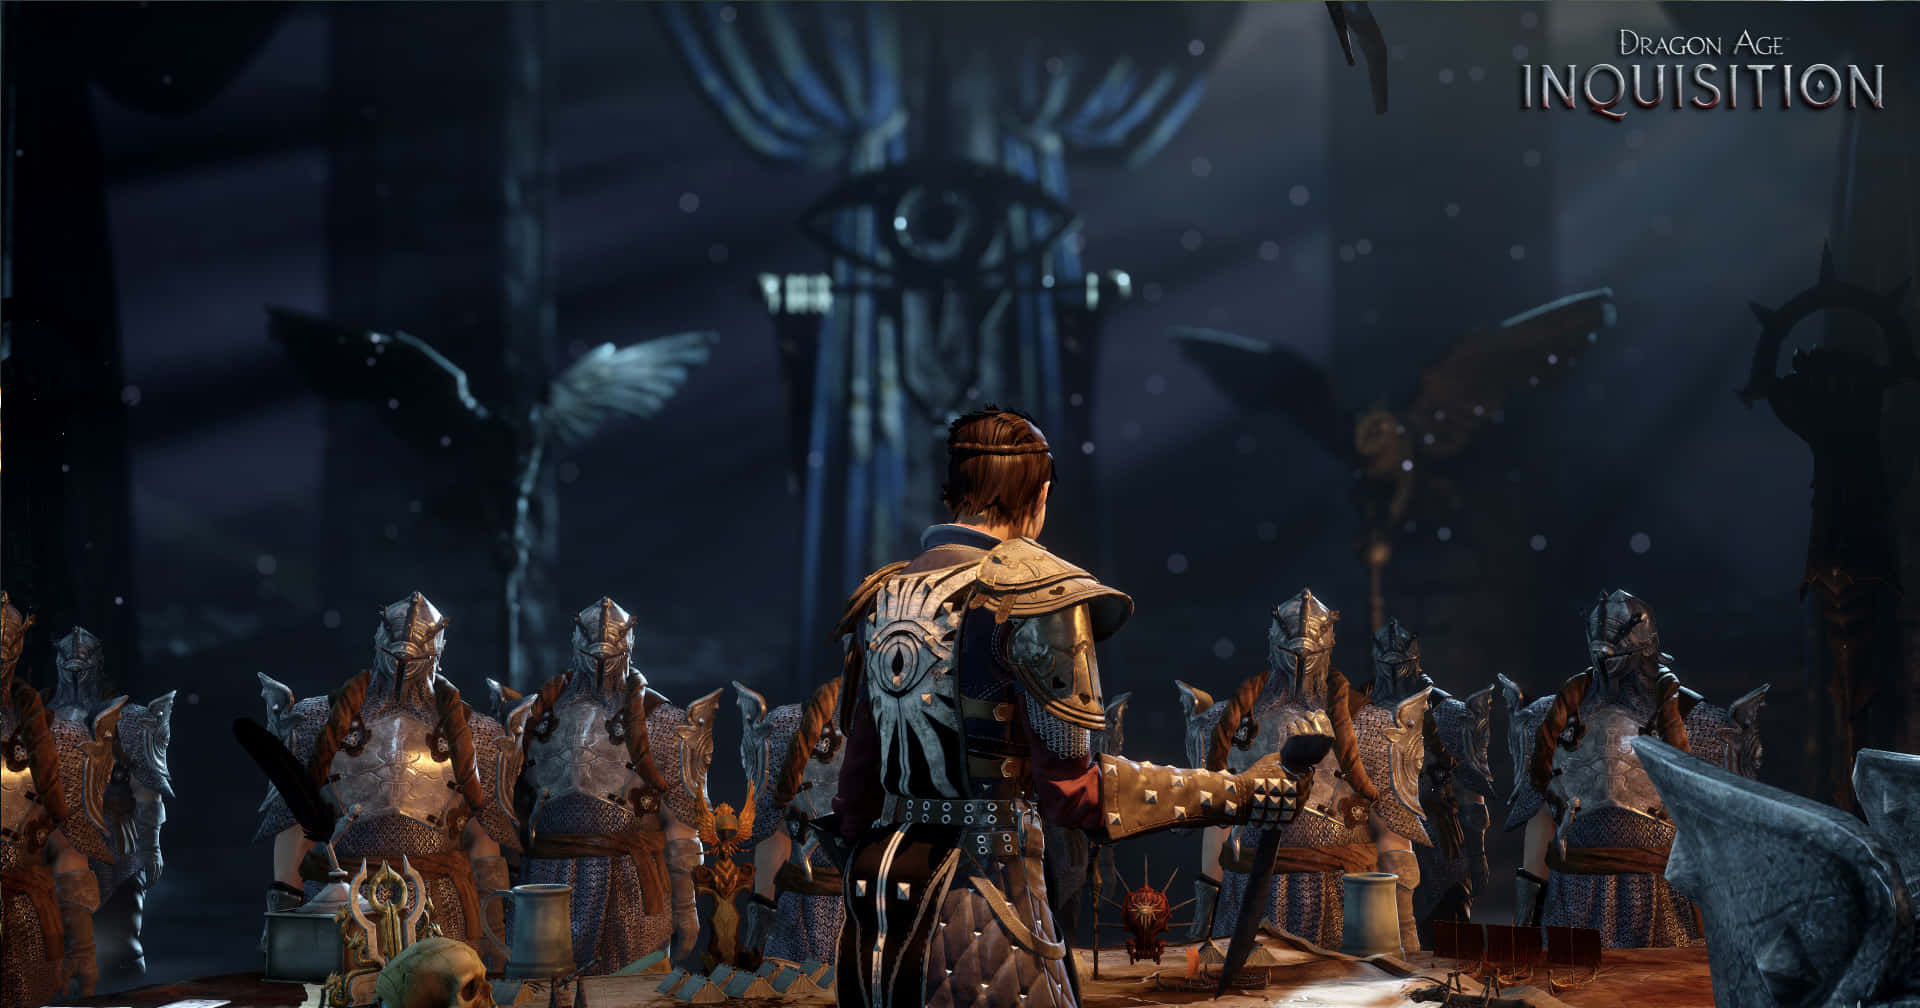 A Fantasy Adventure Awaits in Dragon Age Inquisition